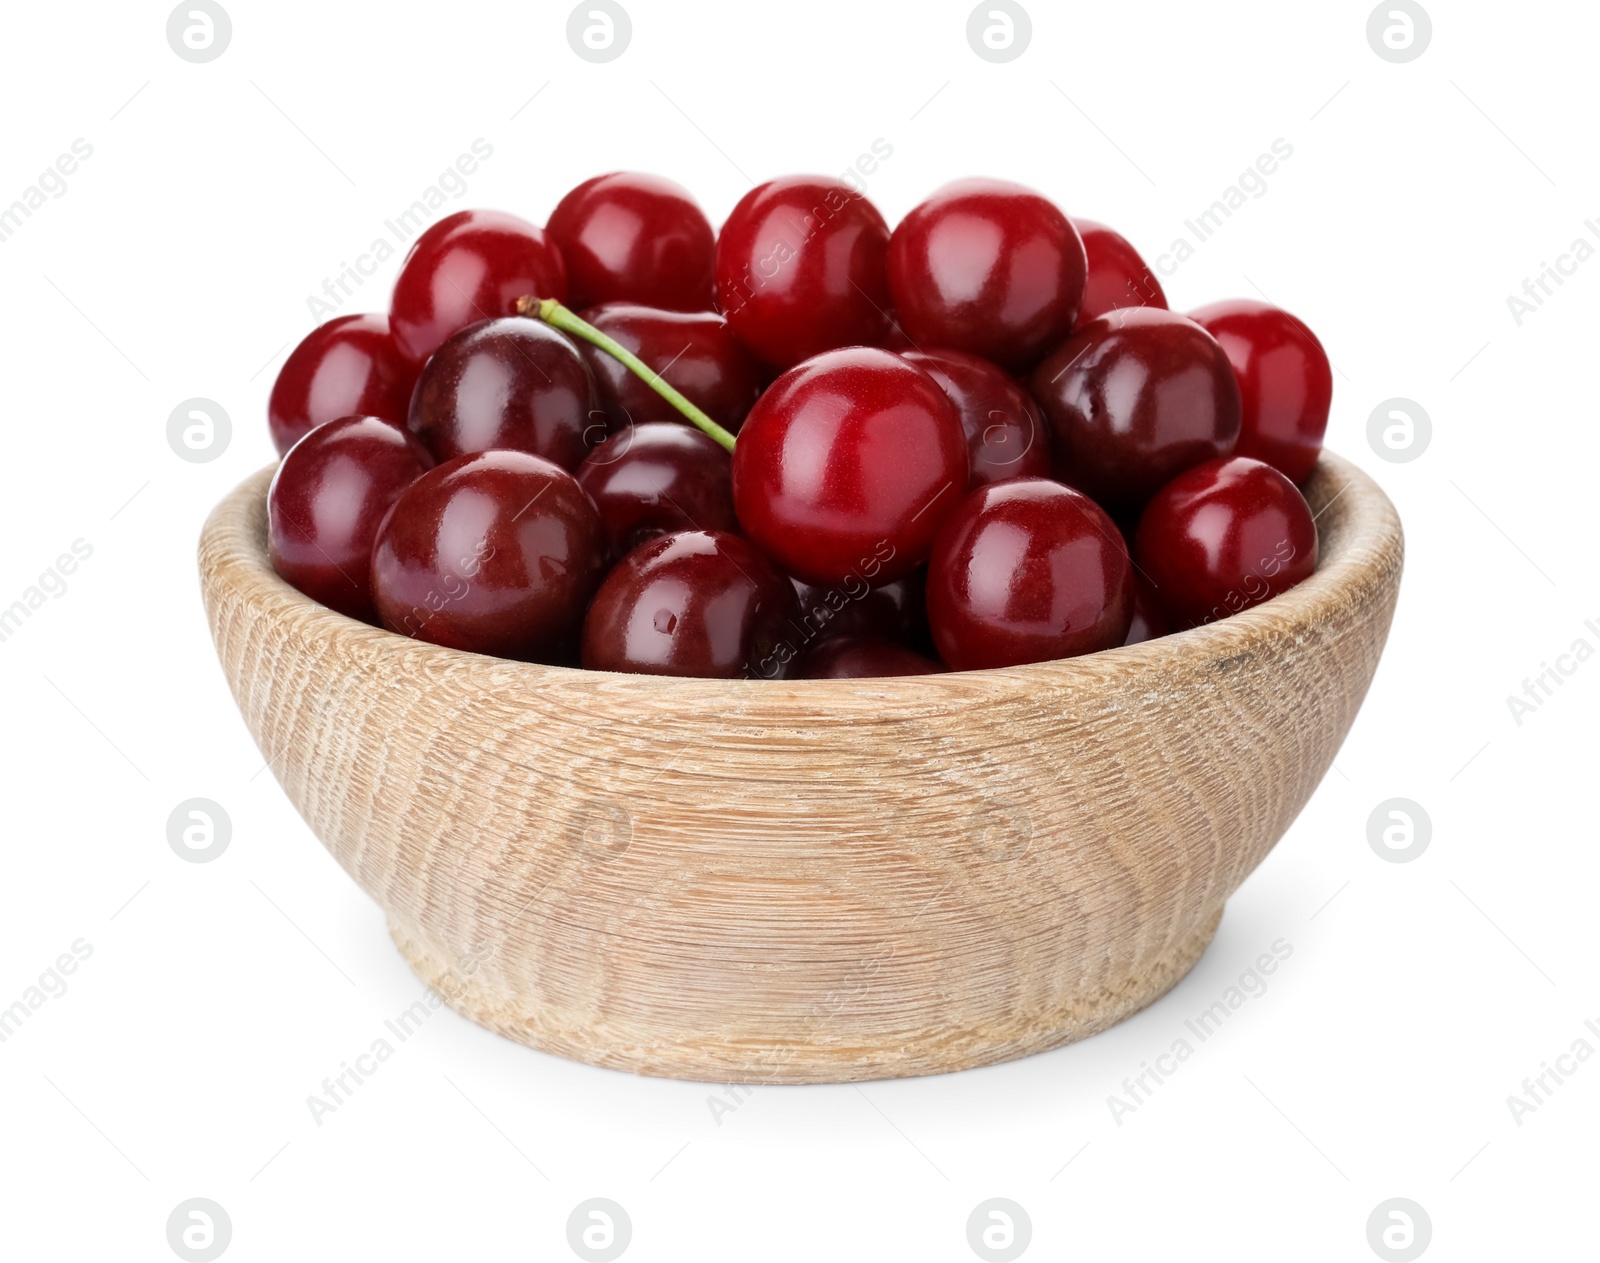 Photo of Sweet juicy cherries in bowl isolated on white